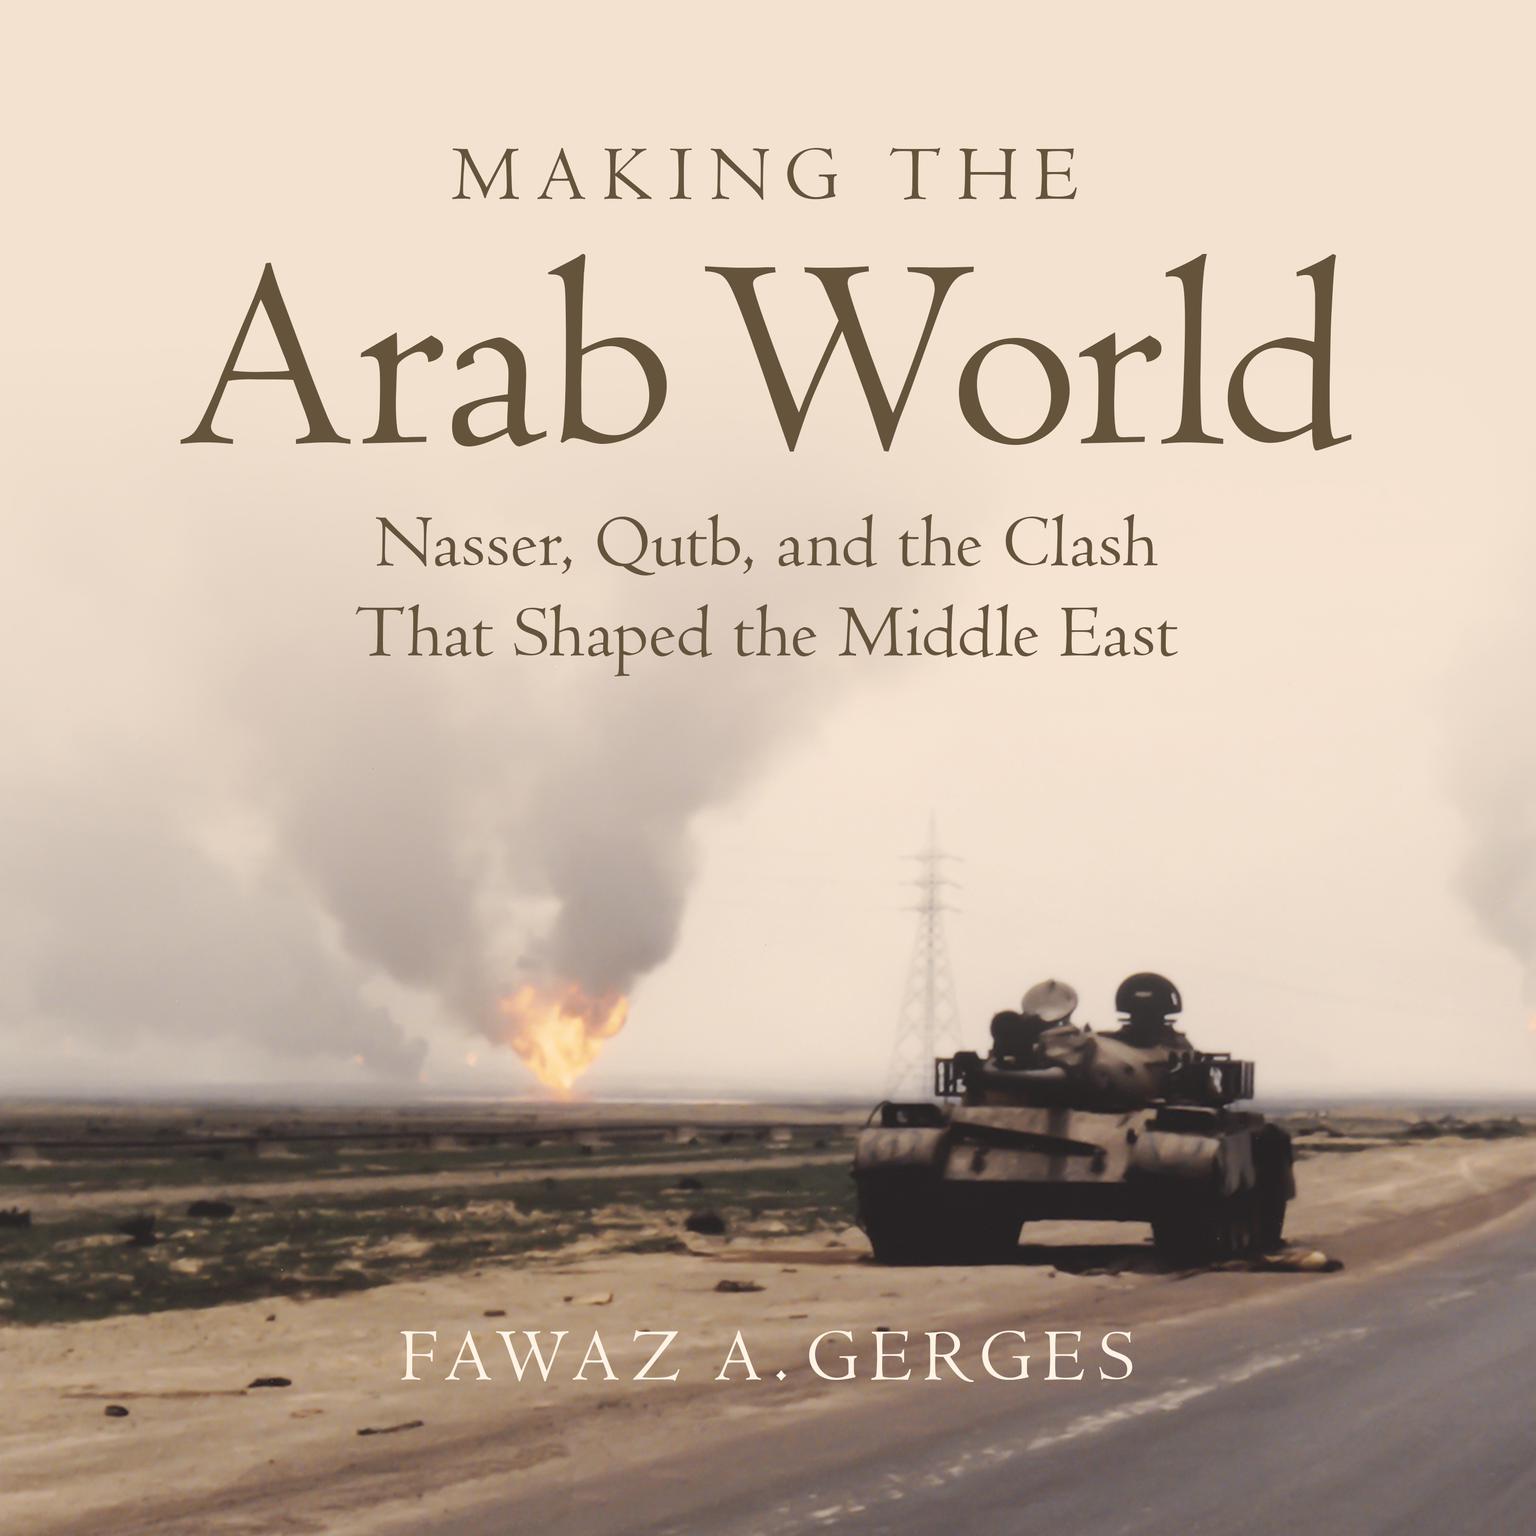 Making the Arab World: Nasser, Qutb, and the Clash That Shaped the Middle East Audiobook, by Fawaz A. Gerges